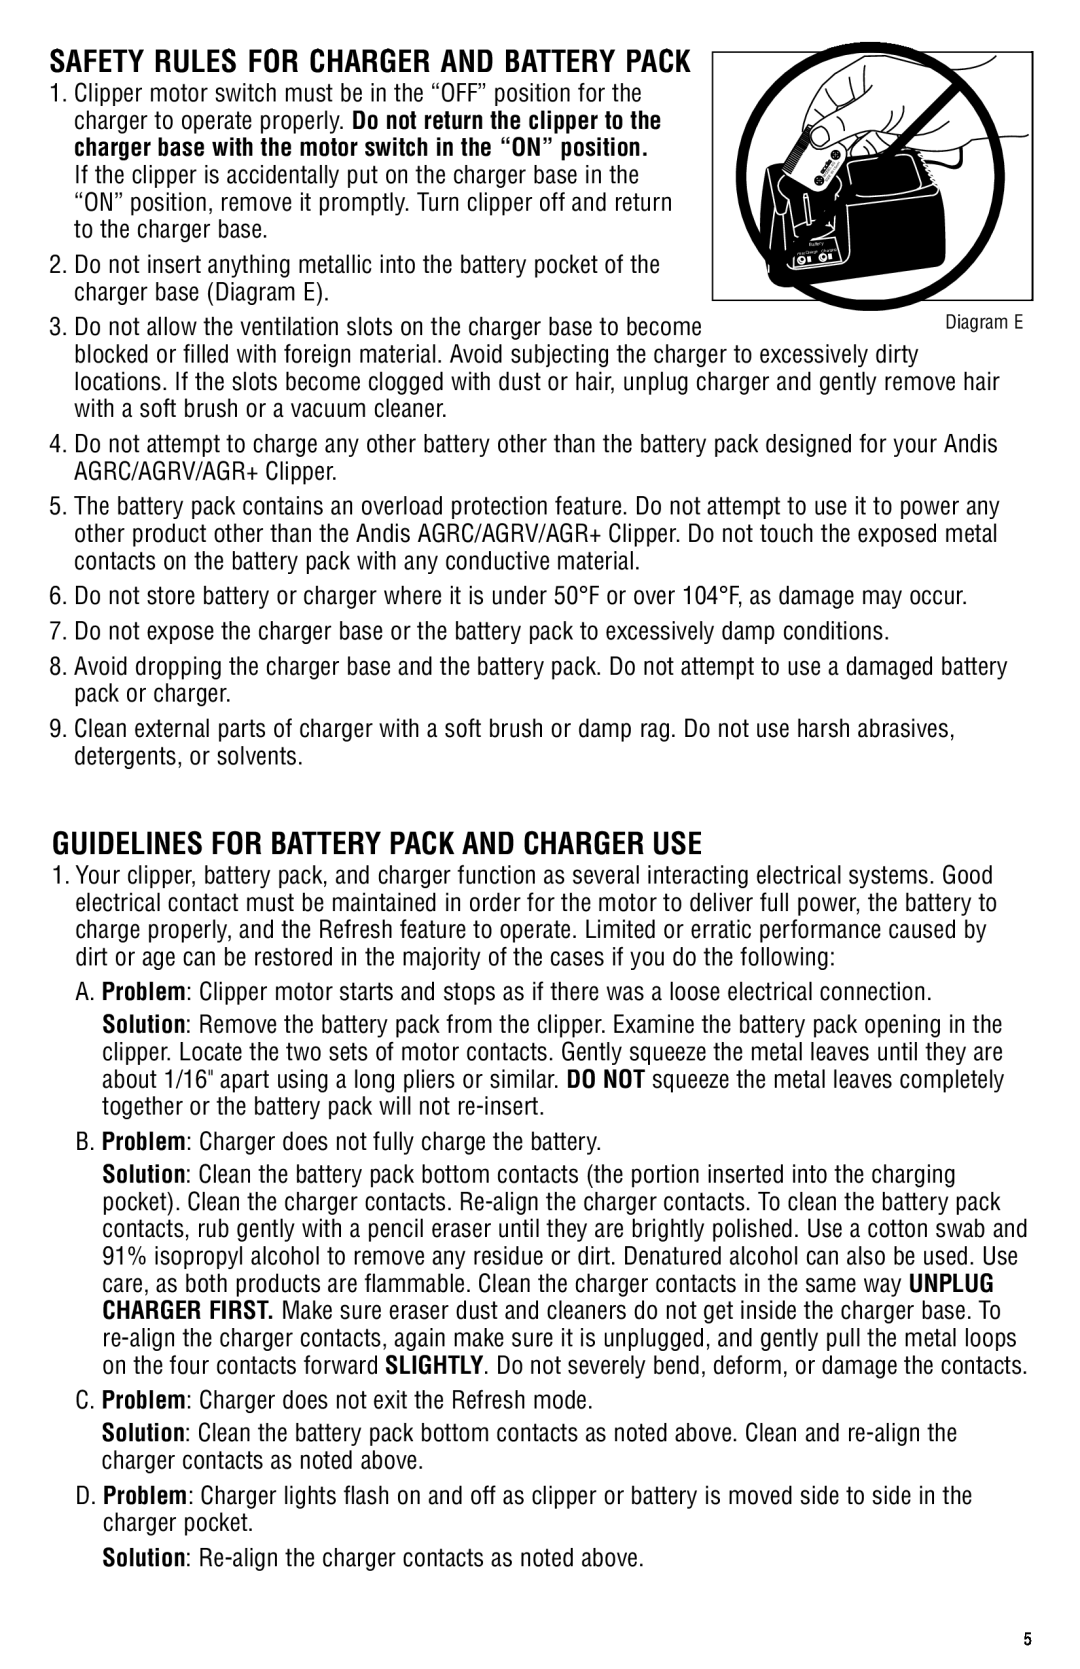 Andis Company AGRC manual Guidelines For Battery Pack And Charger Use, Safety Rules For Charger And Battery Pack 